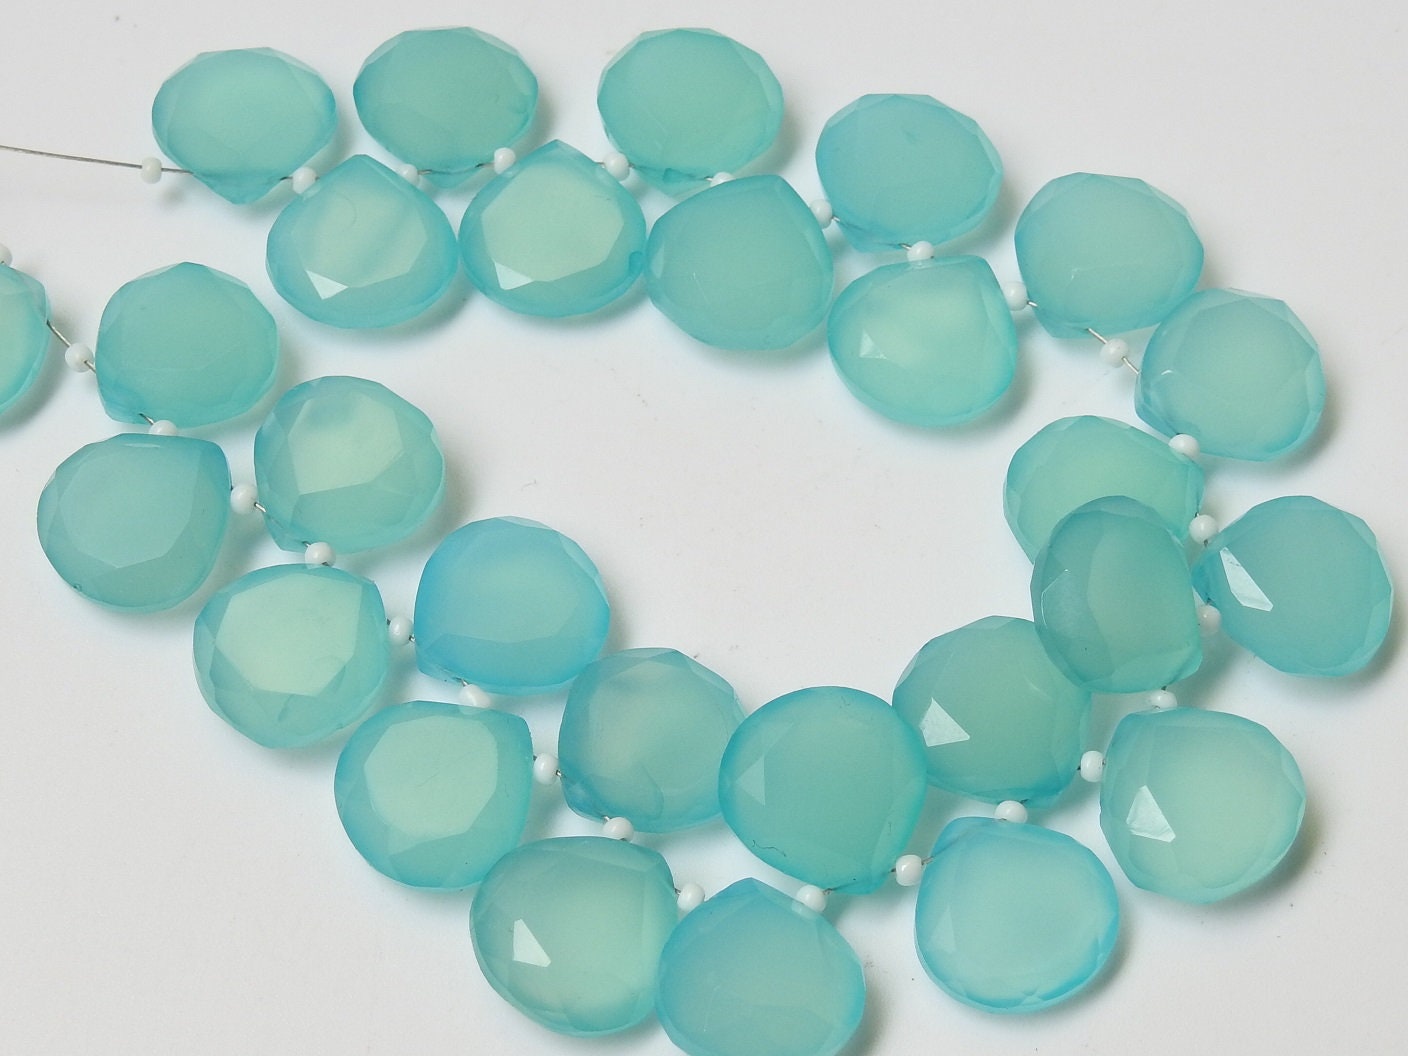 14X14MM Pair,Aqua Blue Chalcedony Faceted Hearts,Teardrop,Drop,Loose Stone,Handmade,For Making Jewelry,Wholesaler,Supplies PME-CY2 | Save 33% - Rajasthan Living 15